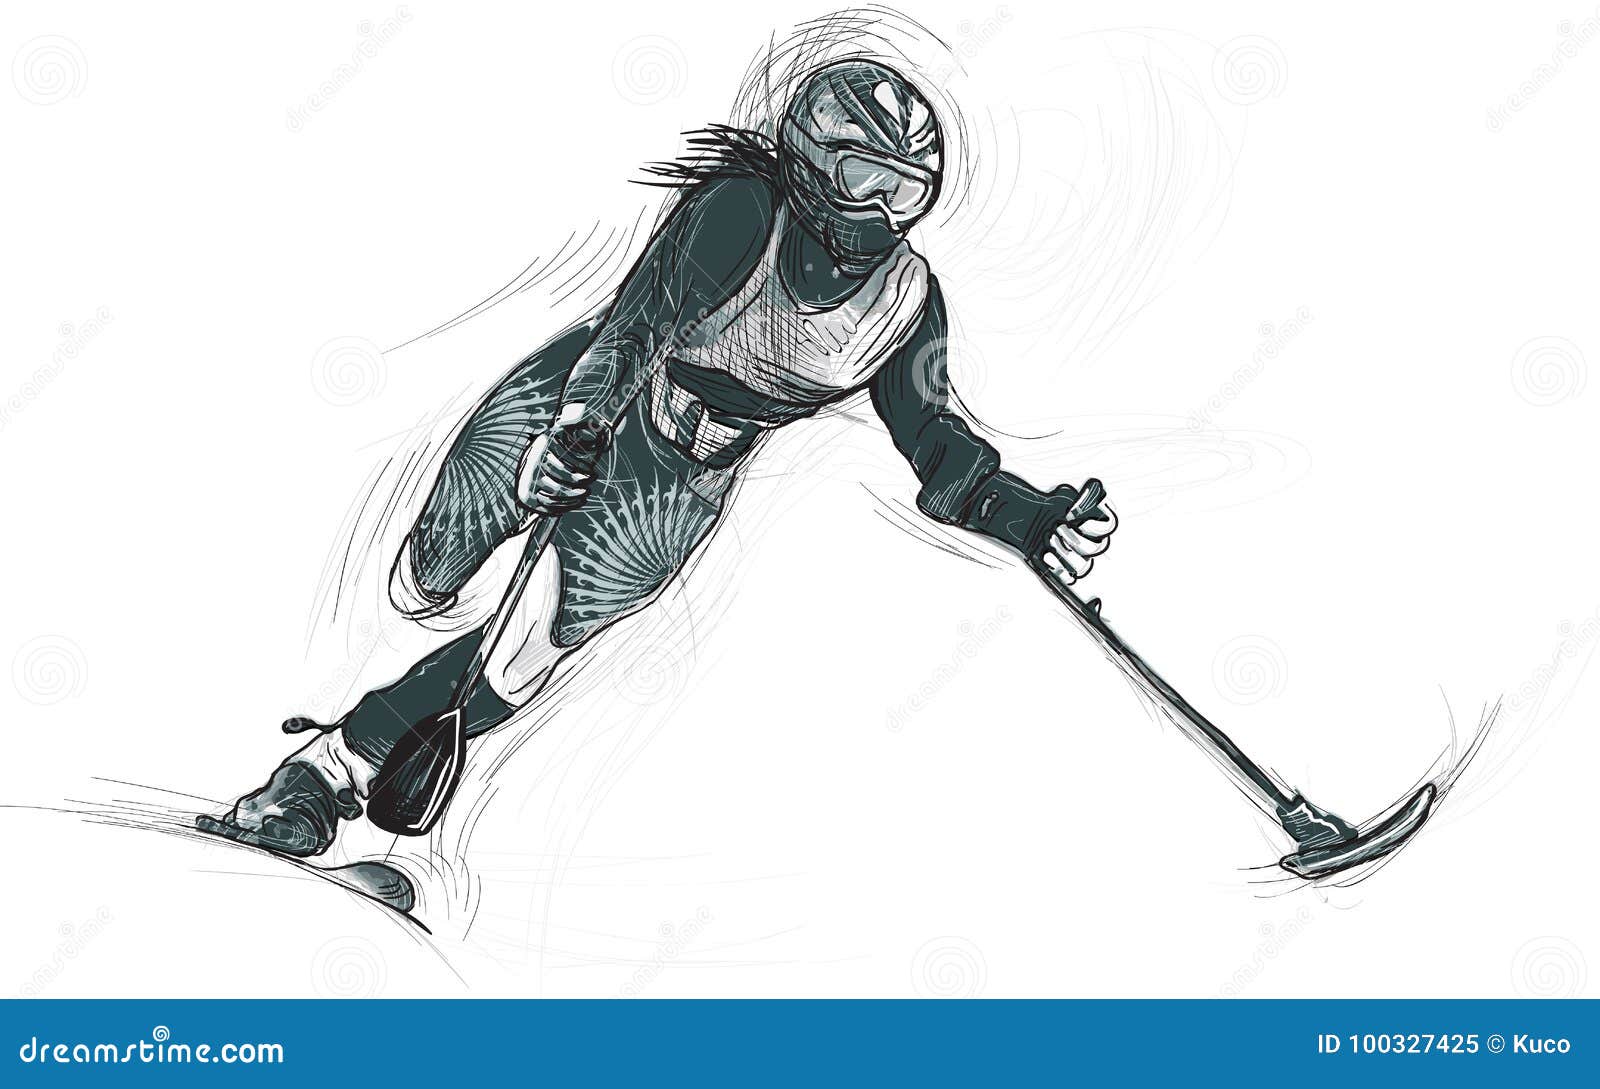 athletes with physical disabilities - alpine skiing